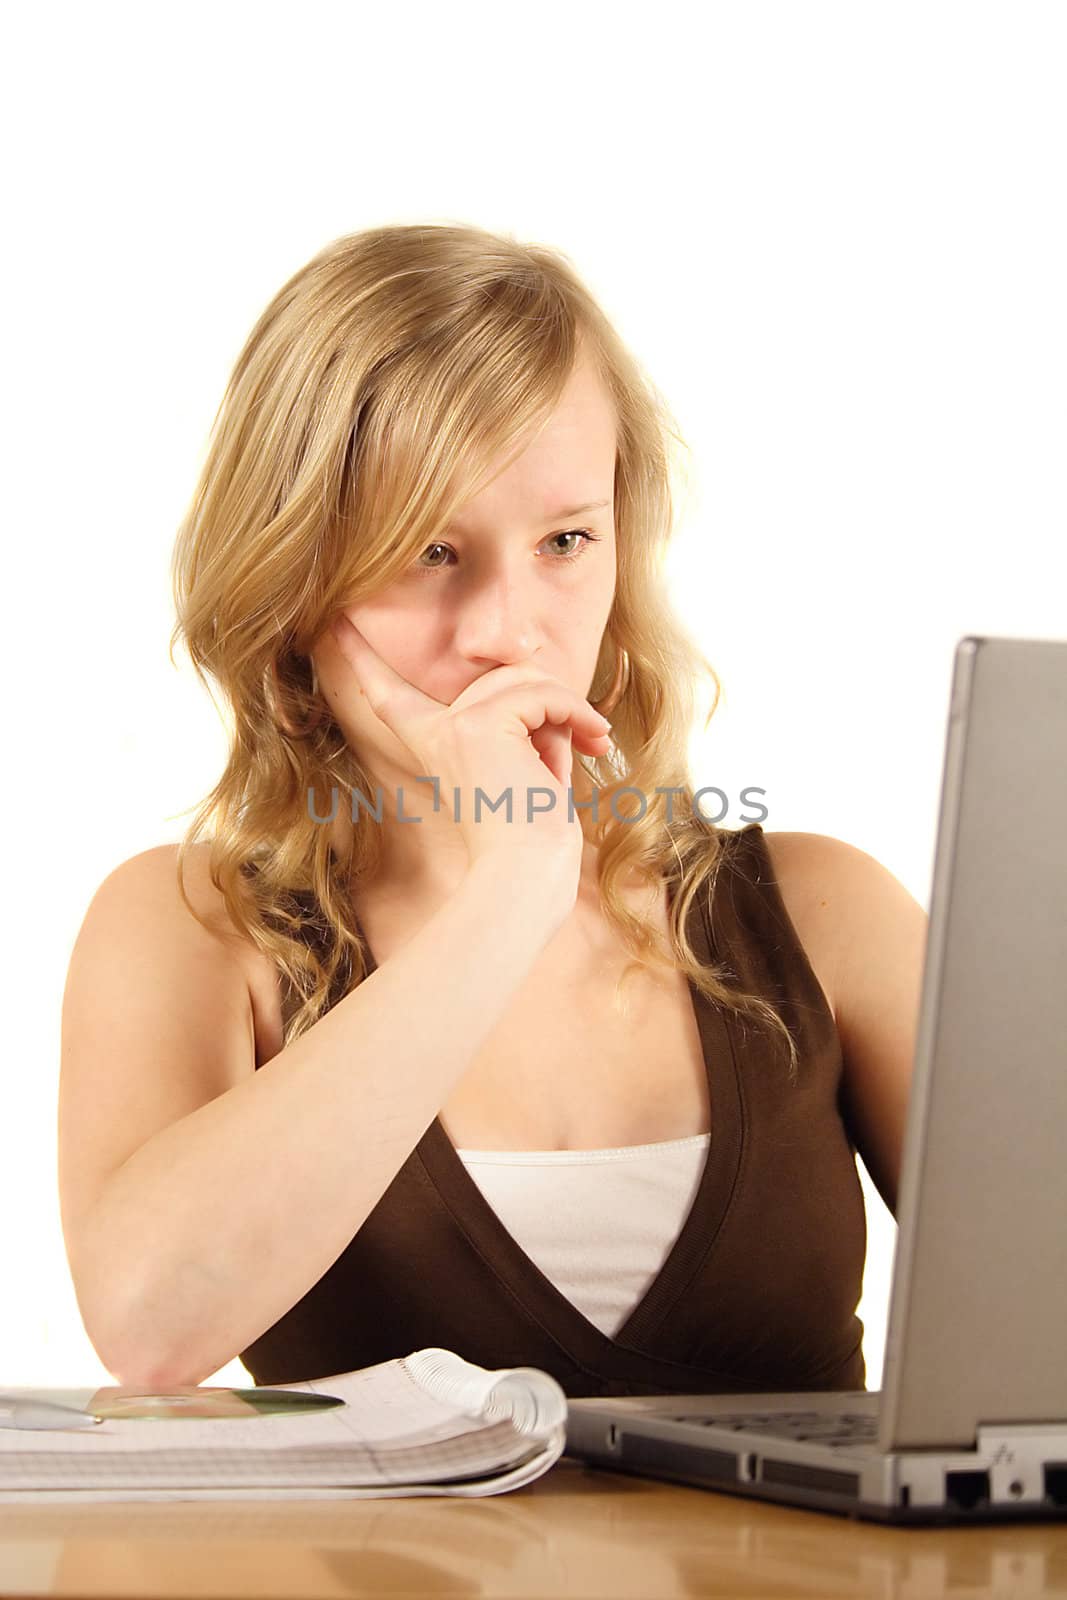 A young ambitious woman in front of her notebook computer. All isolated on white background.